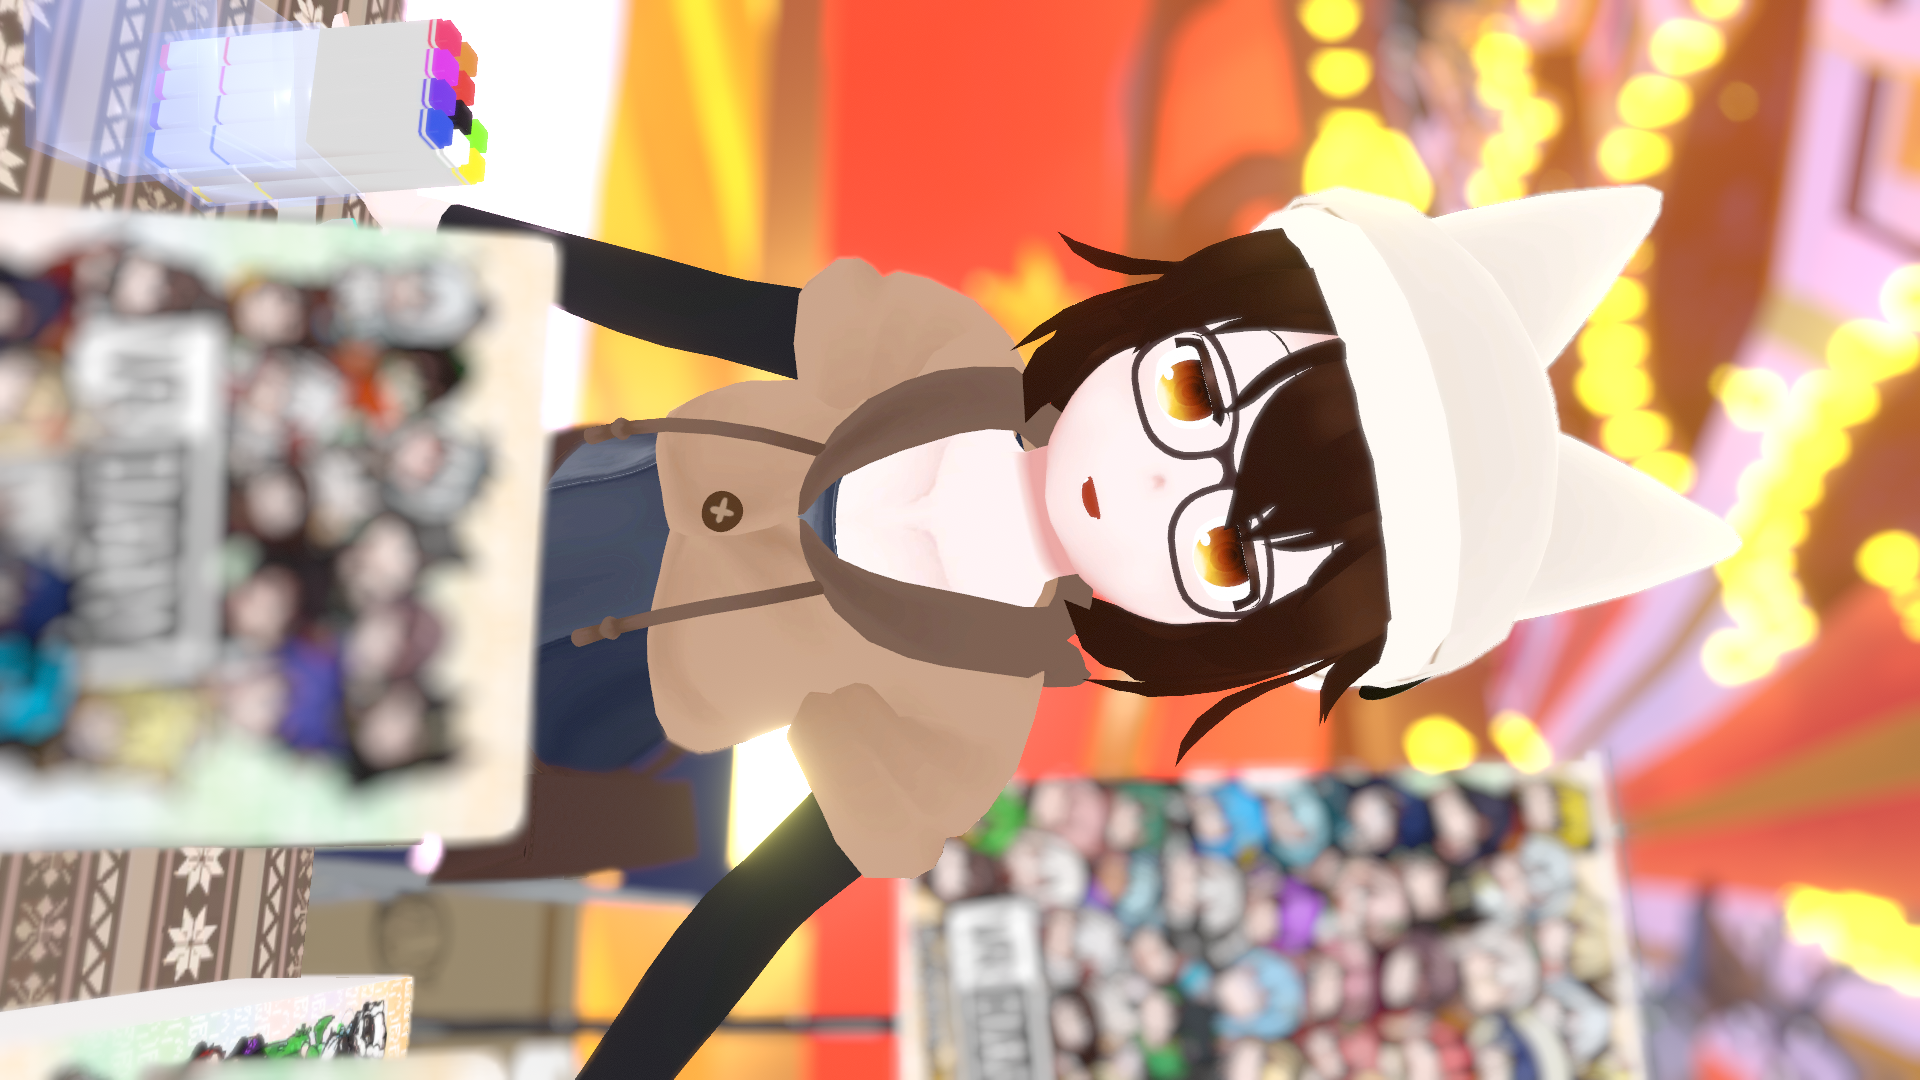 VRChat_1920x1080_2021-12-05_05-15-14.383.png